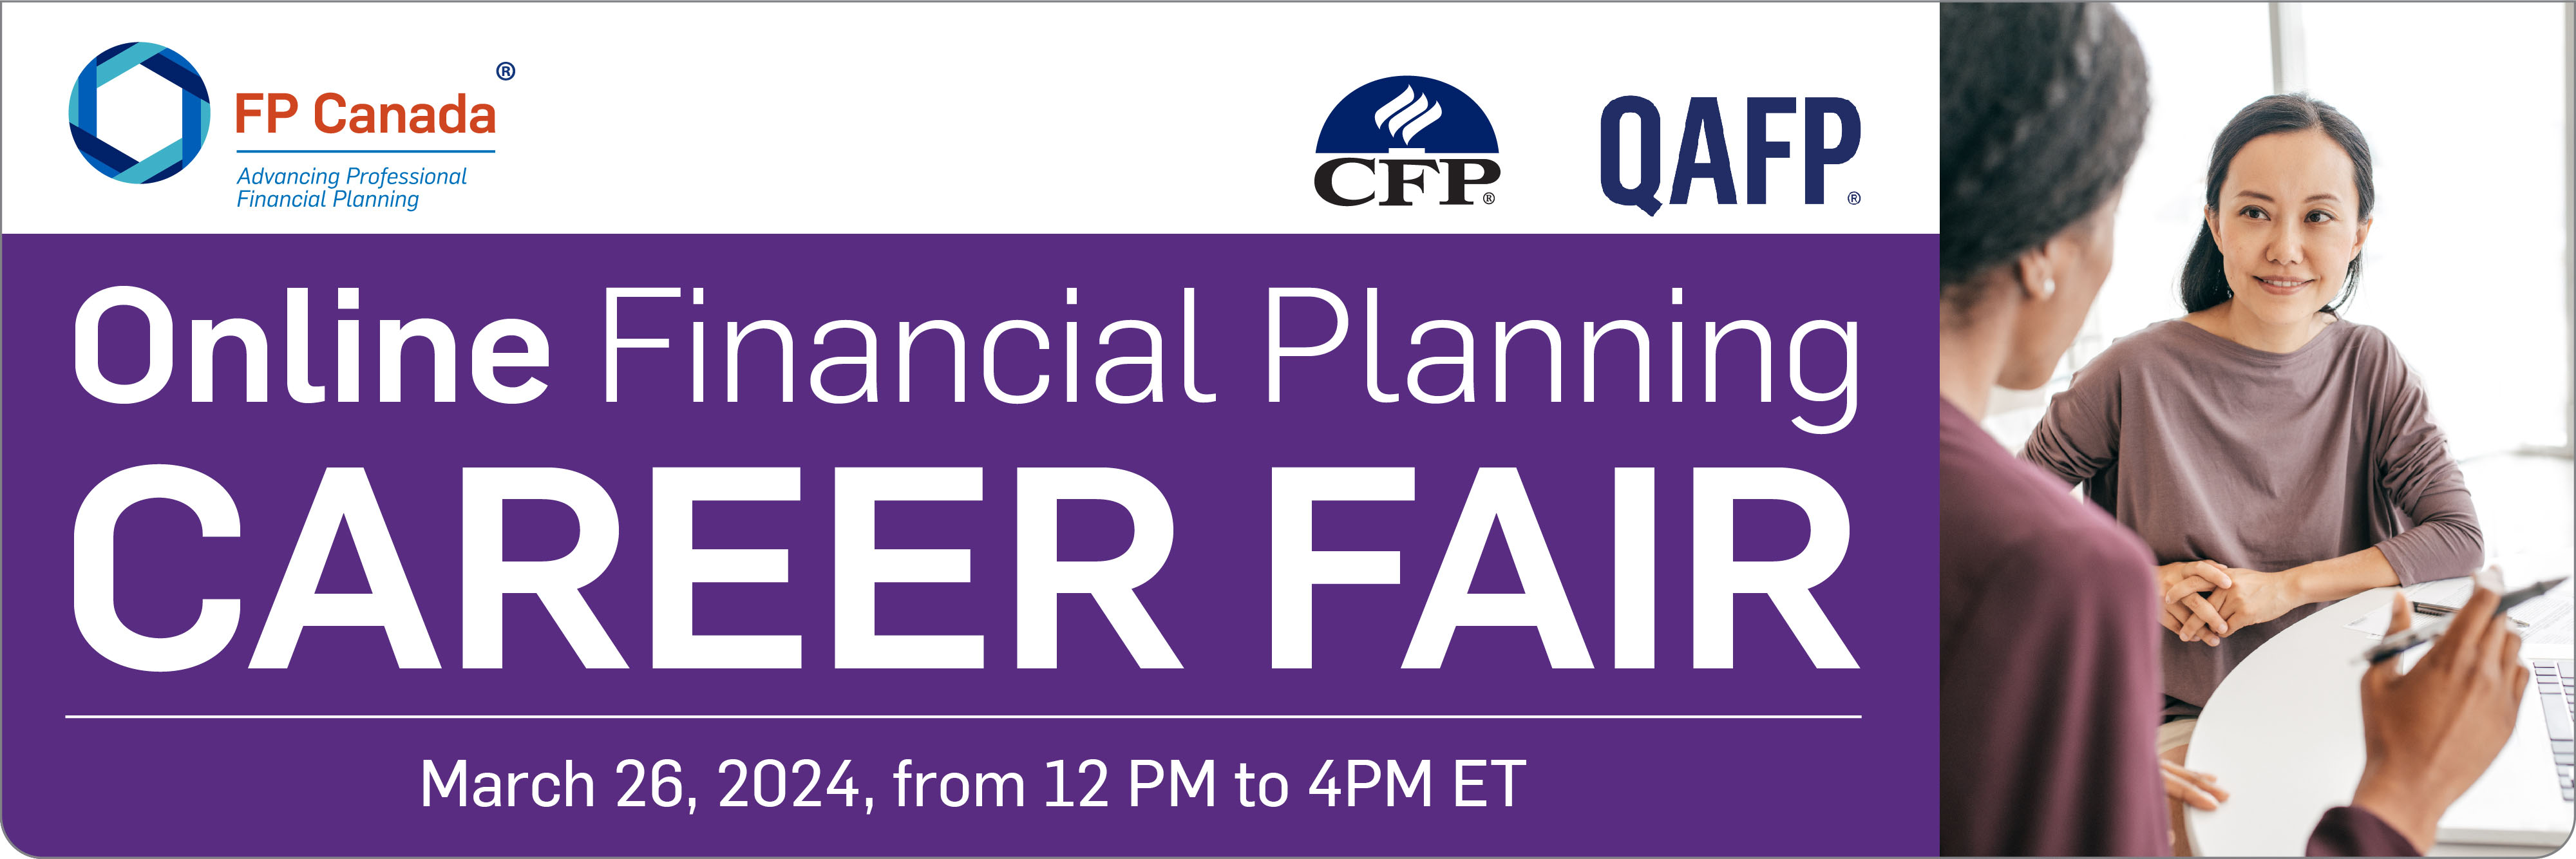 FP Canada Online Financial Planning Career Fair March 26, 2024 from Noon to 4pm ET. FP Canada logo, CFP and QAFP logo.  Young person sitting at a table talking to a mentor